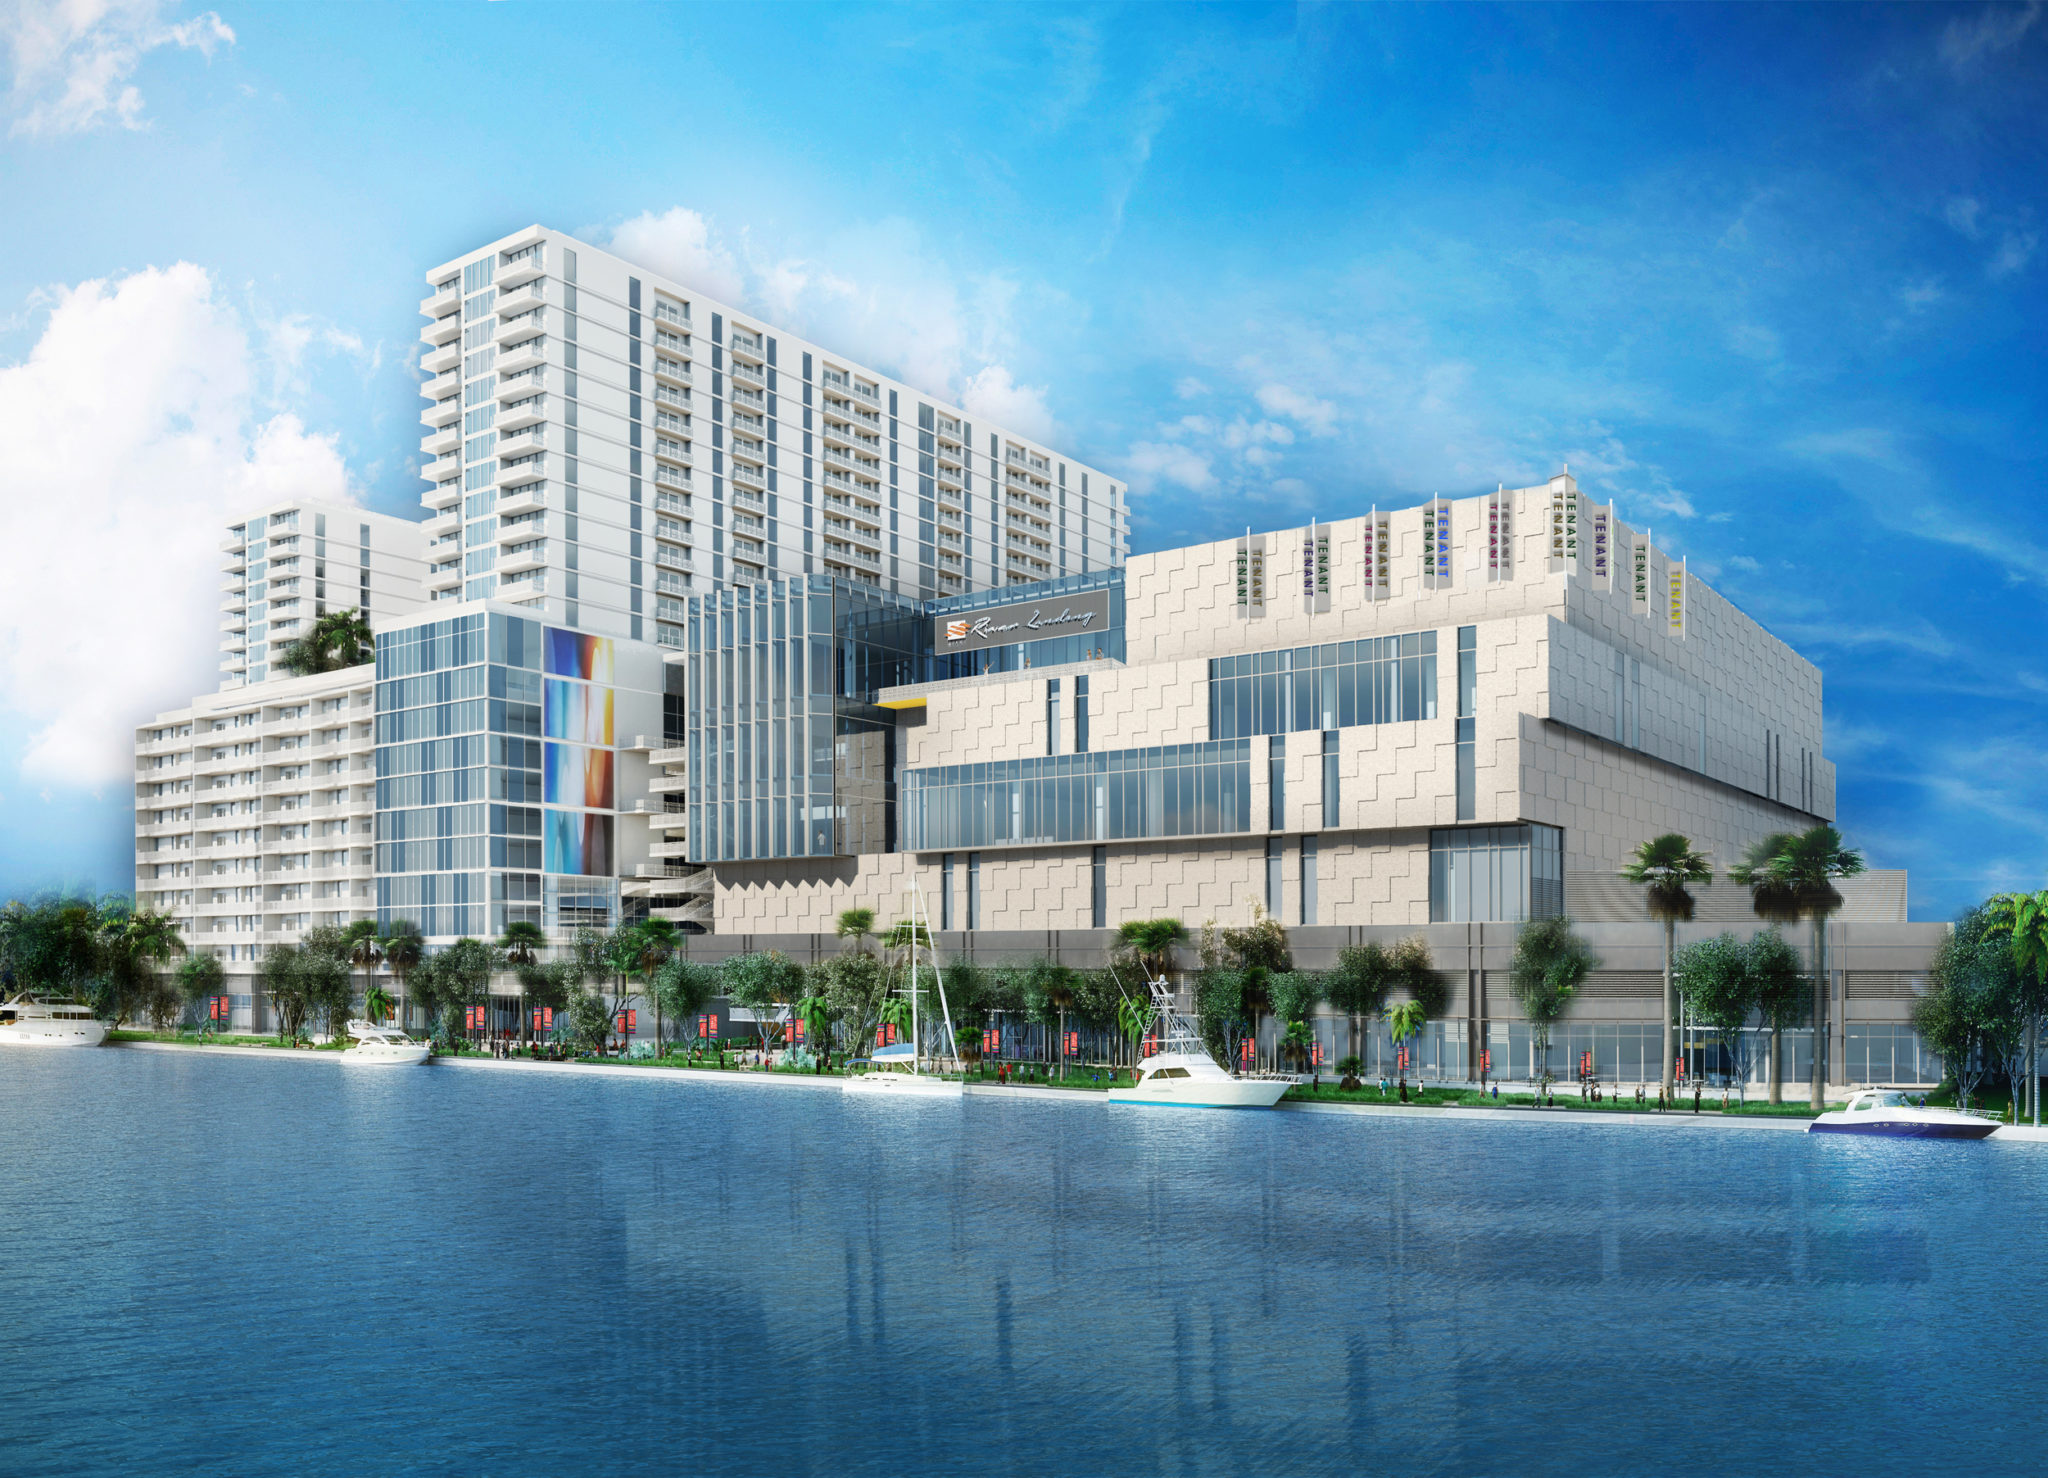 Contractor Wins the $260 Million Contract to Build River Landing in Miami